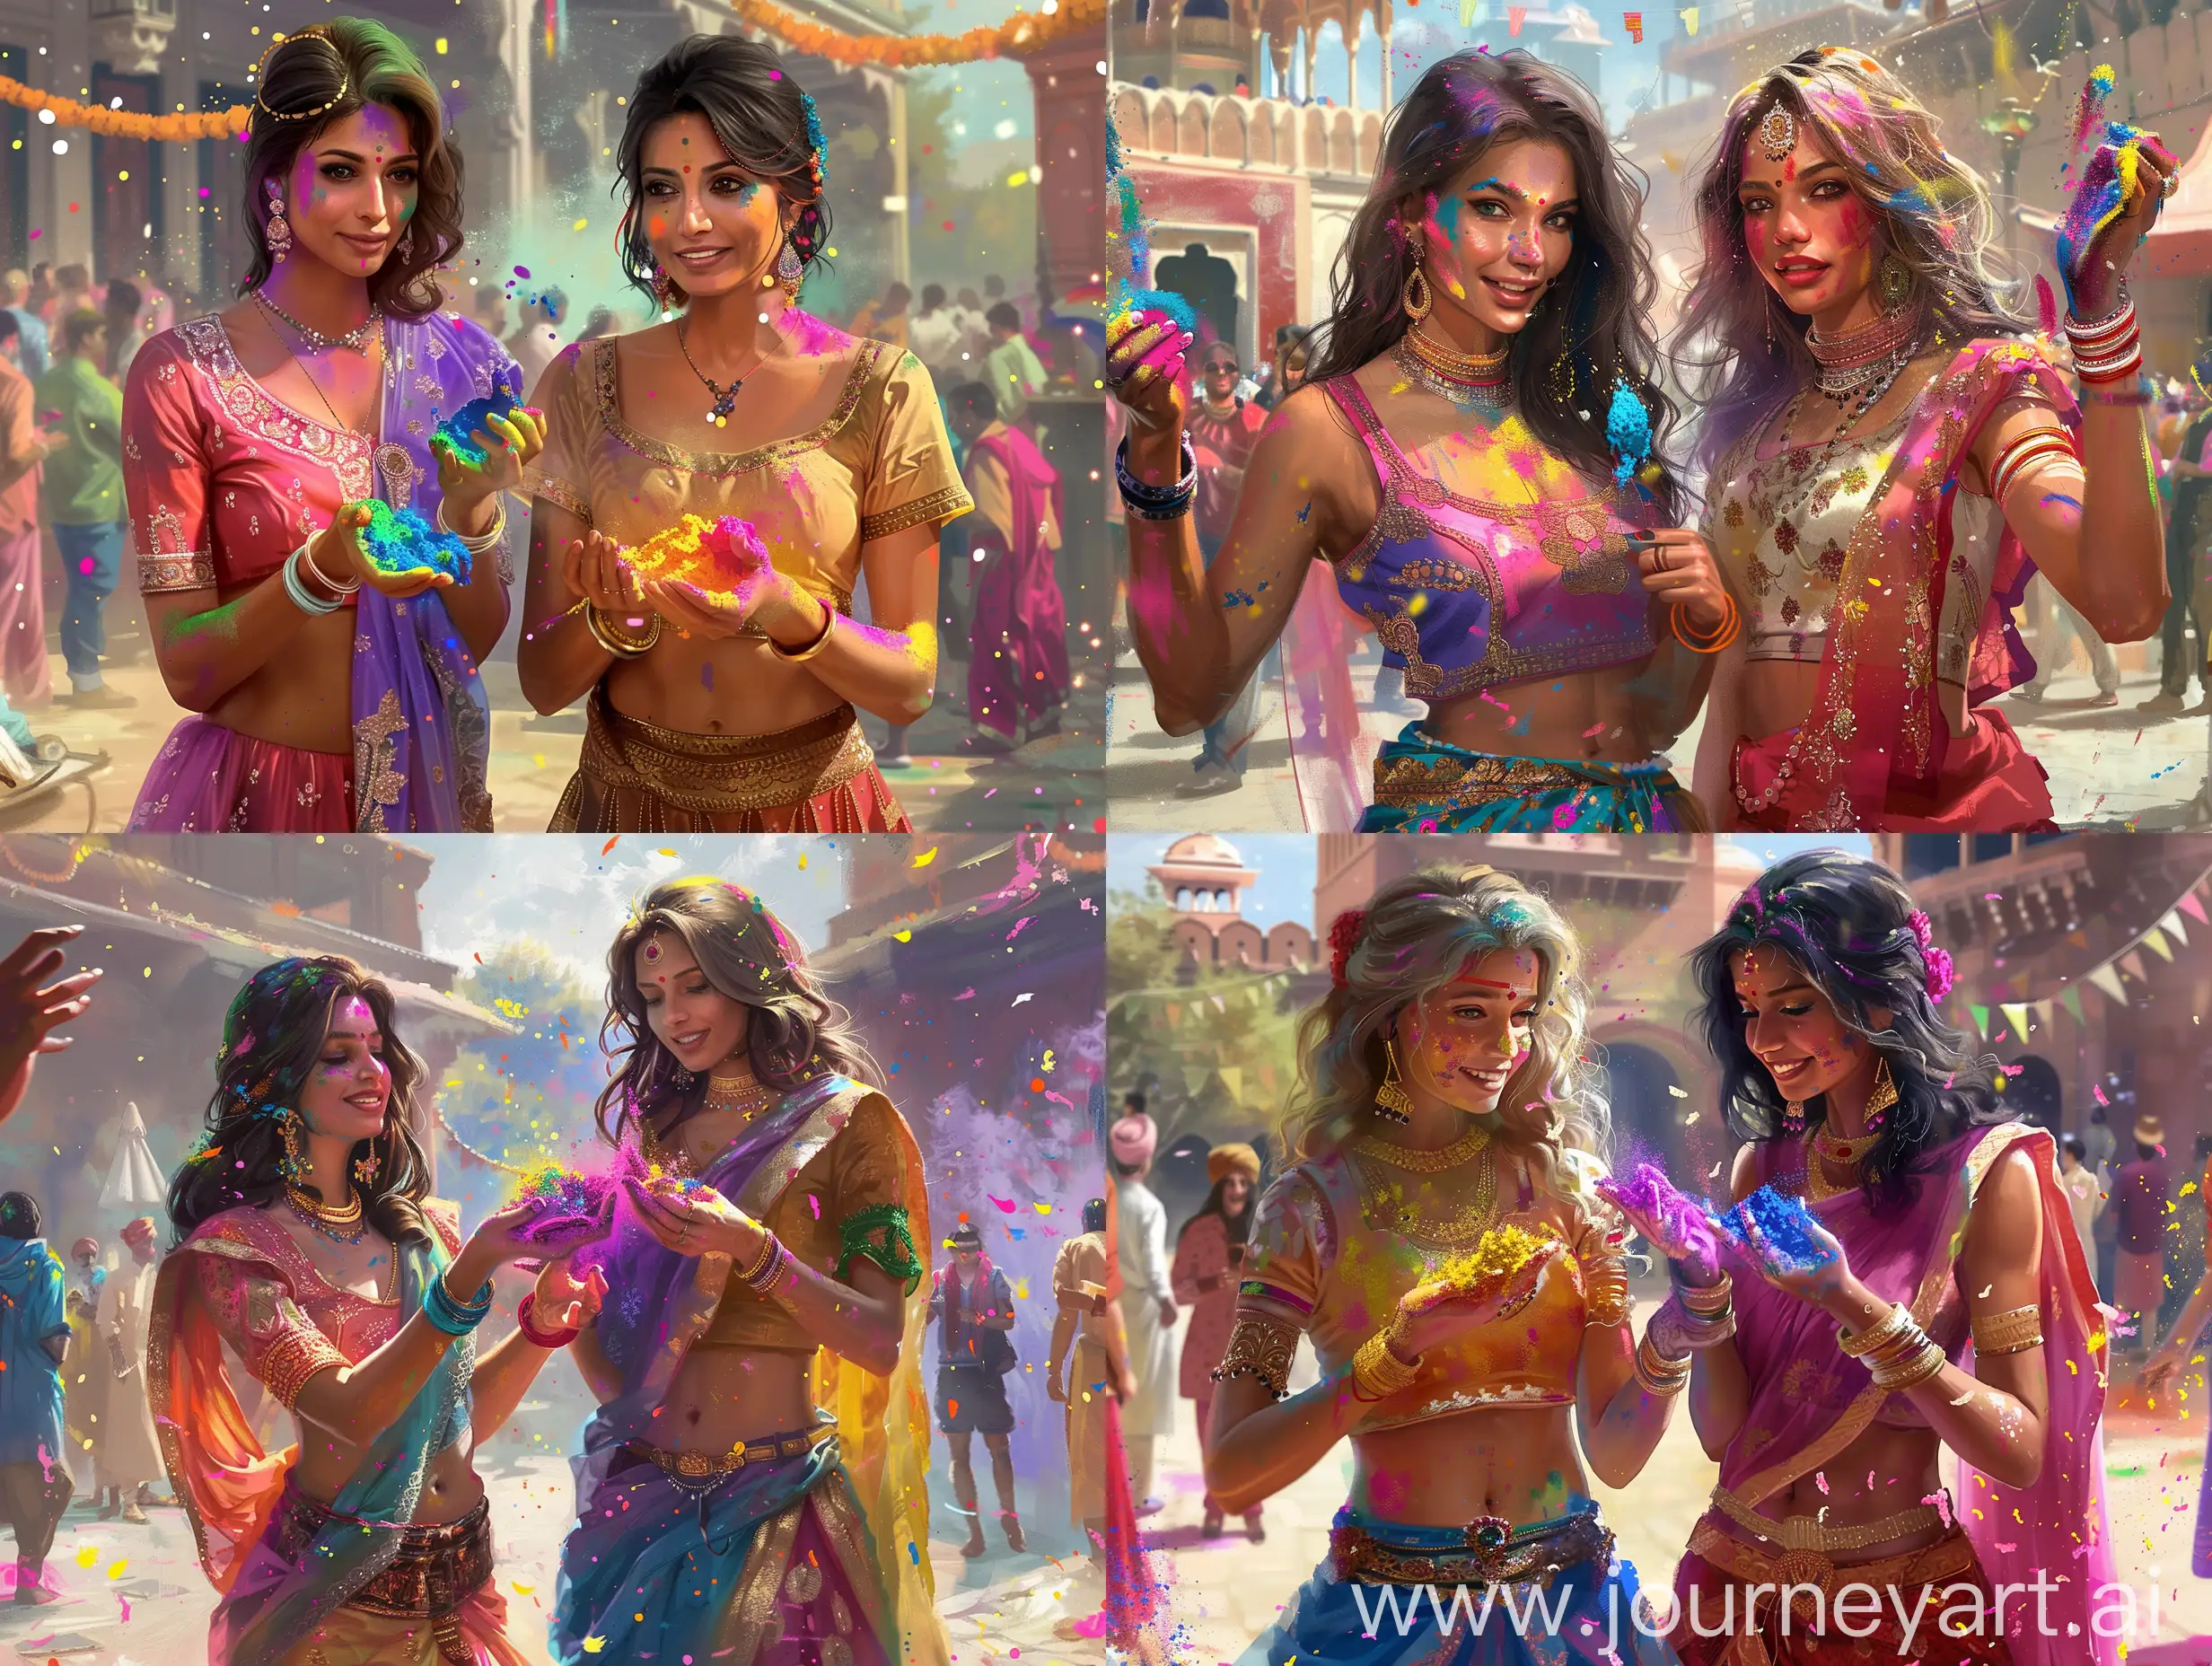 Western-and-Indian-Women-Celebrating-Holi-Festival-with-Vibrant-Powdered-Dyes